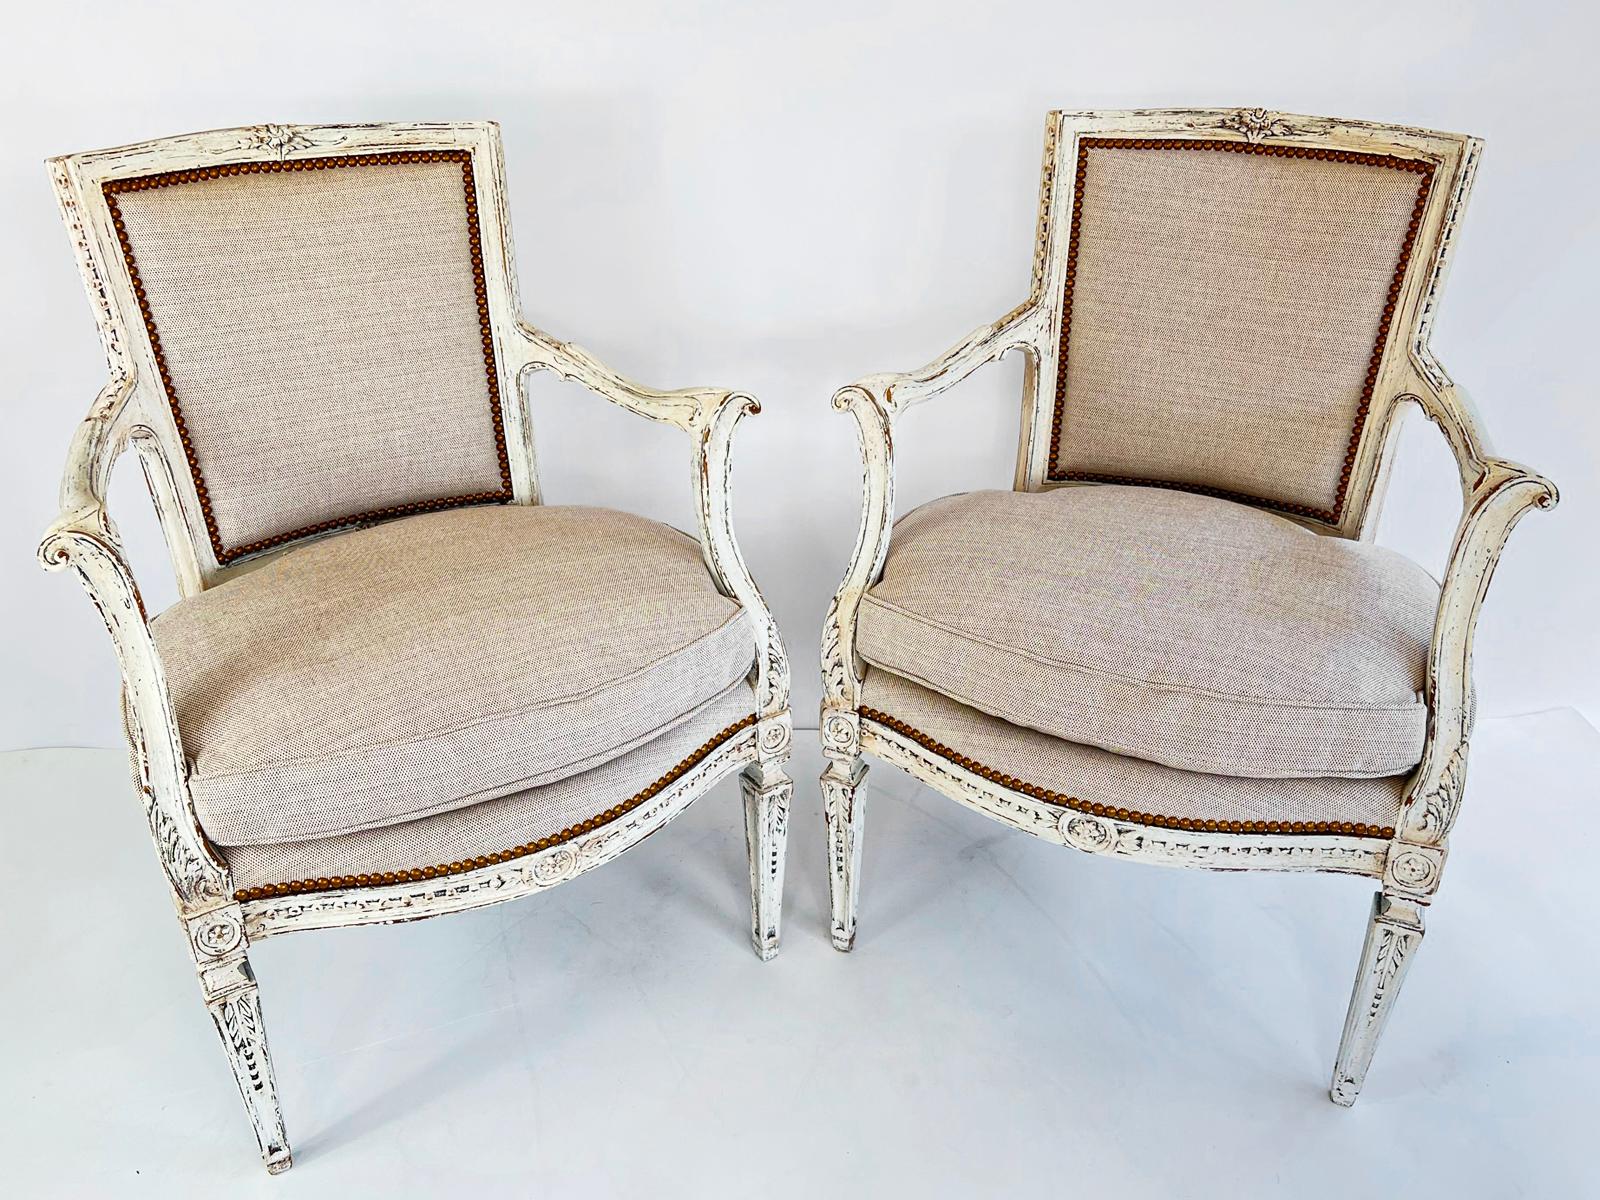 Pair of painted Italian armchairs. Each padded backrest is surrounded by a fielded frame surmounted by floral carving and decorated by beading along its side channel of the back. The outswept arms are uniquely carved with curvaceous scrolls, and